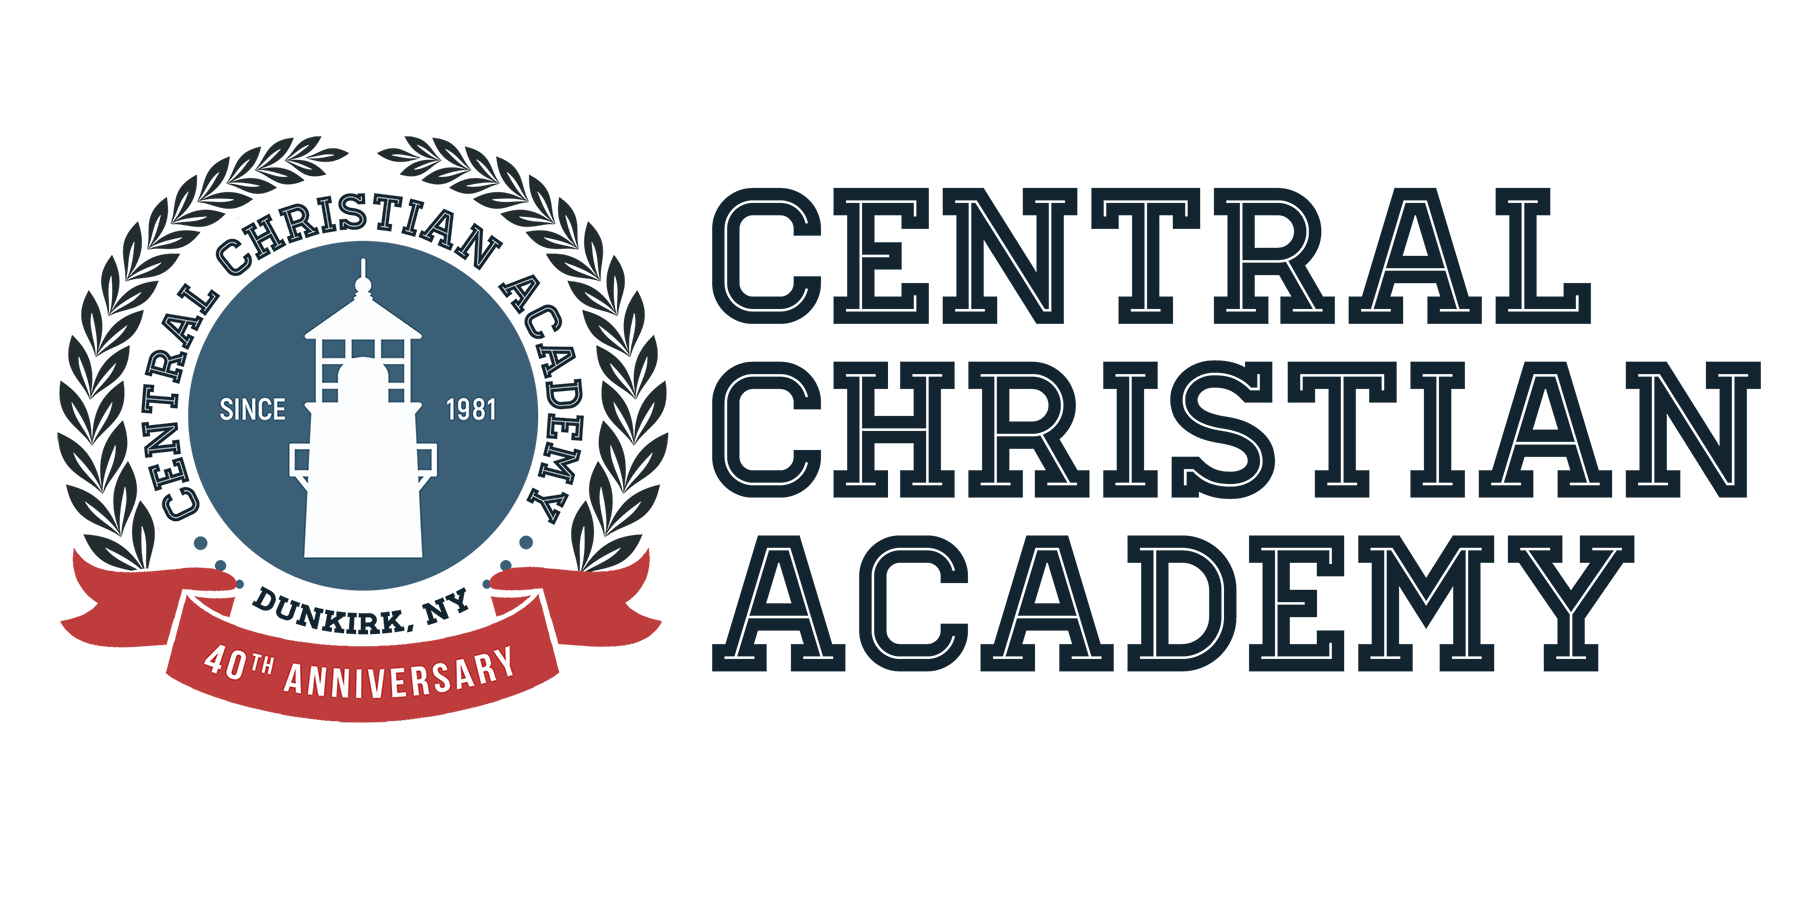 Tuition And Fees 2021-2022 - Central Christian Academy